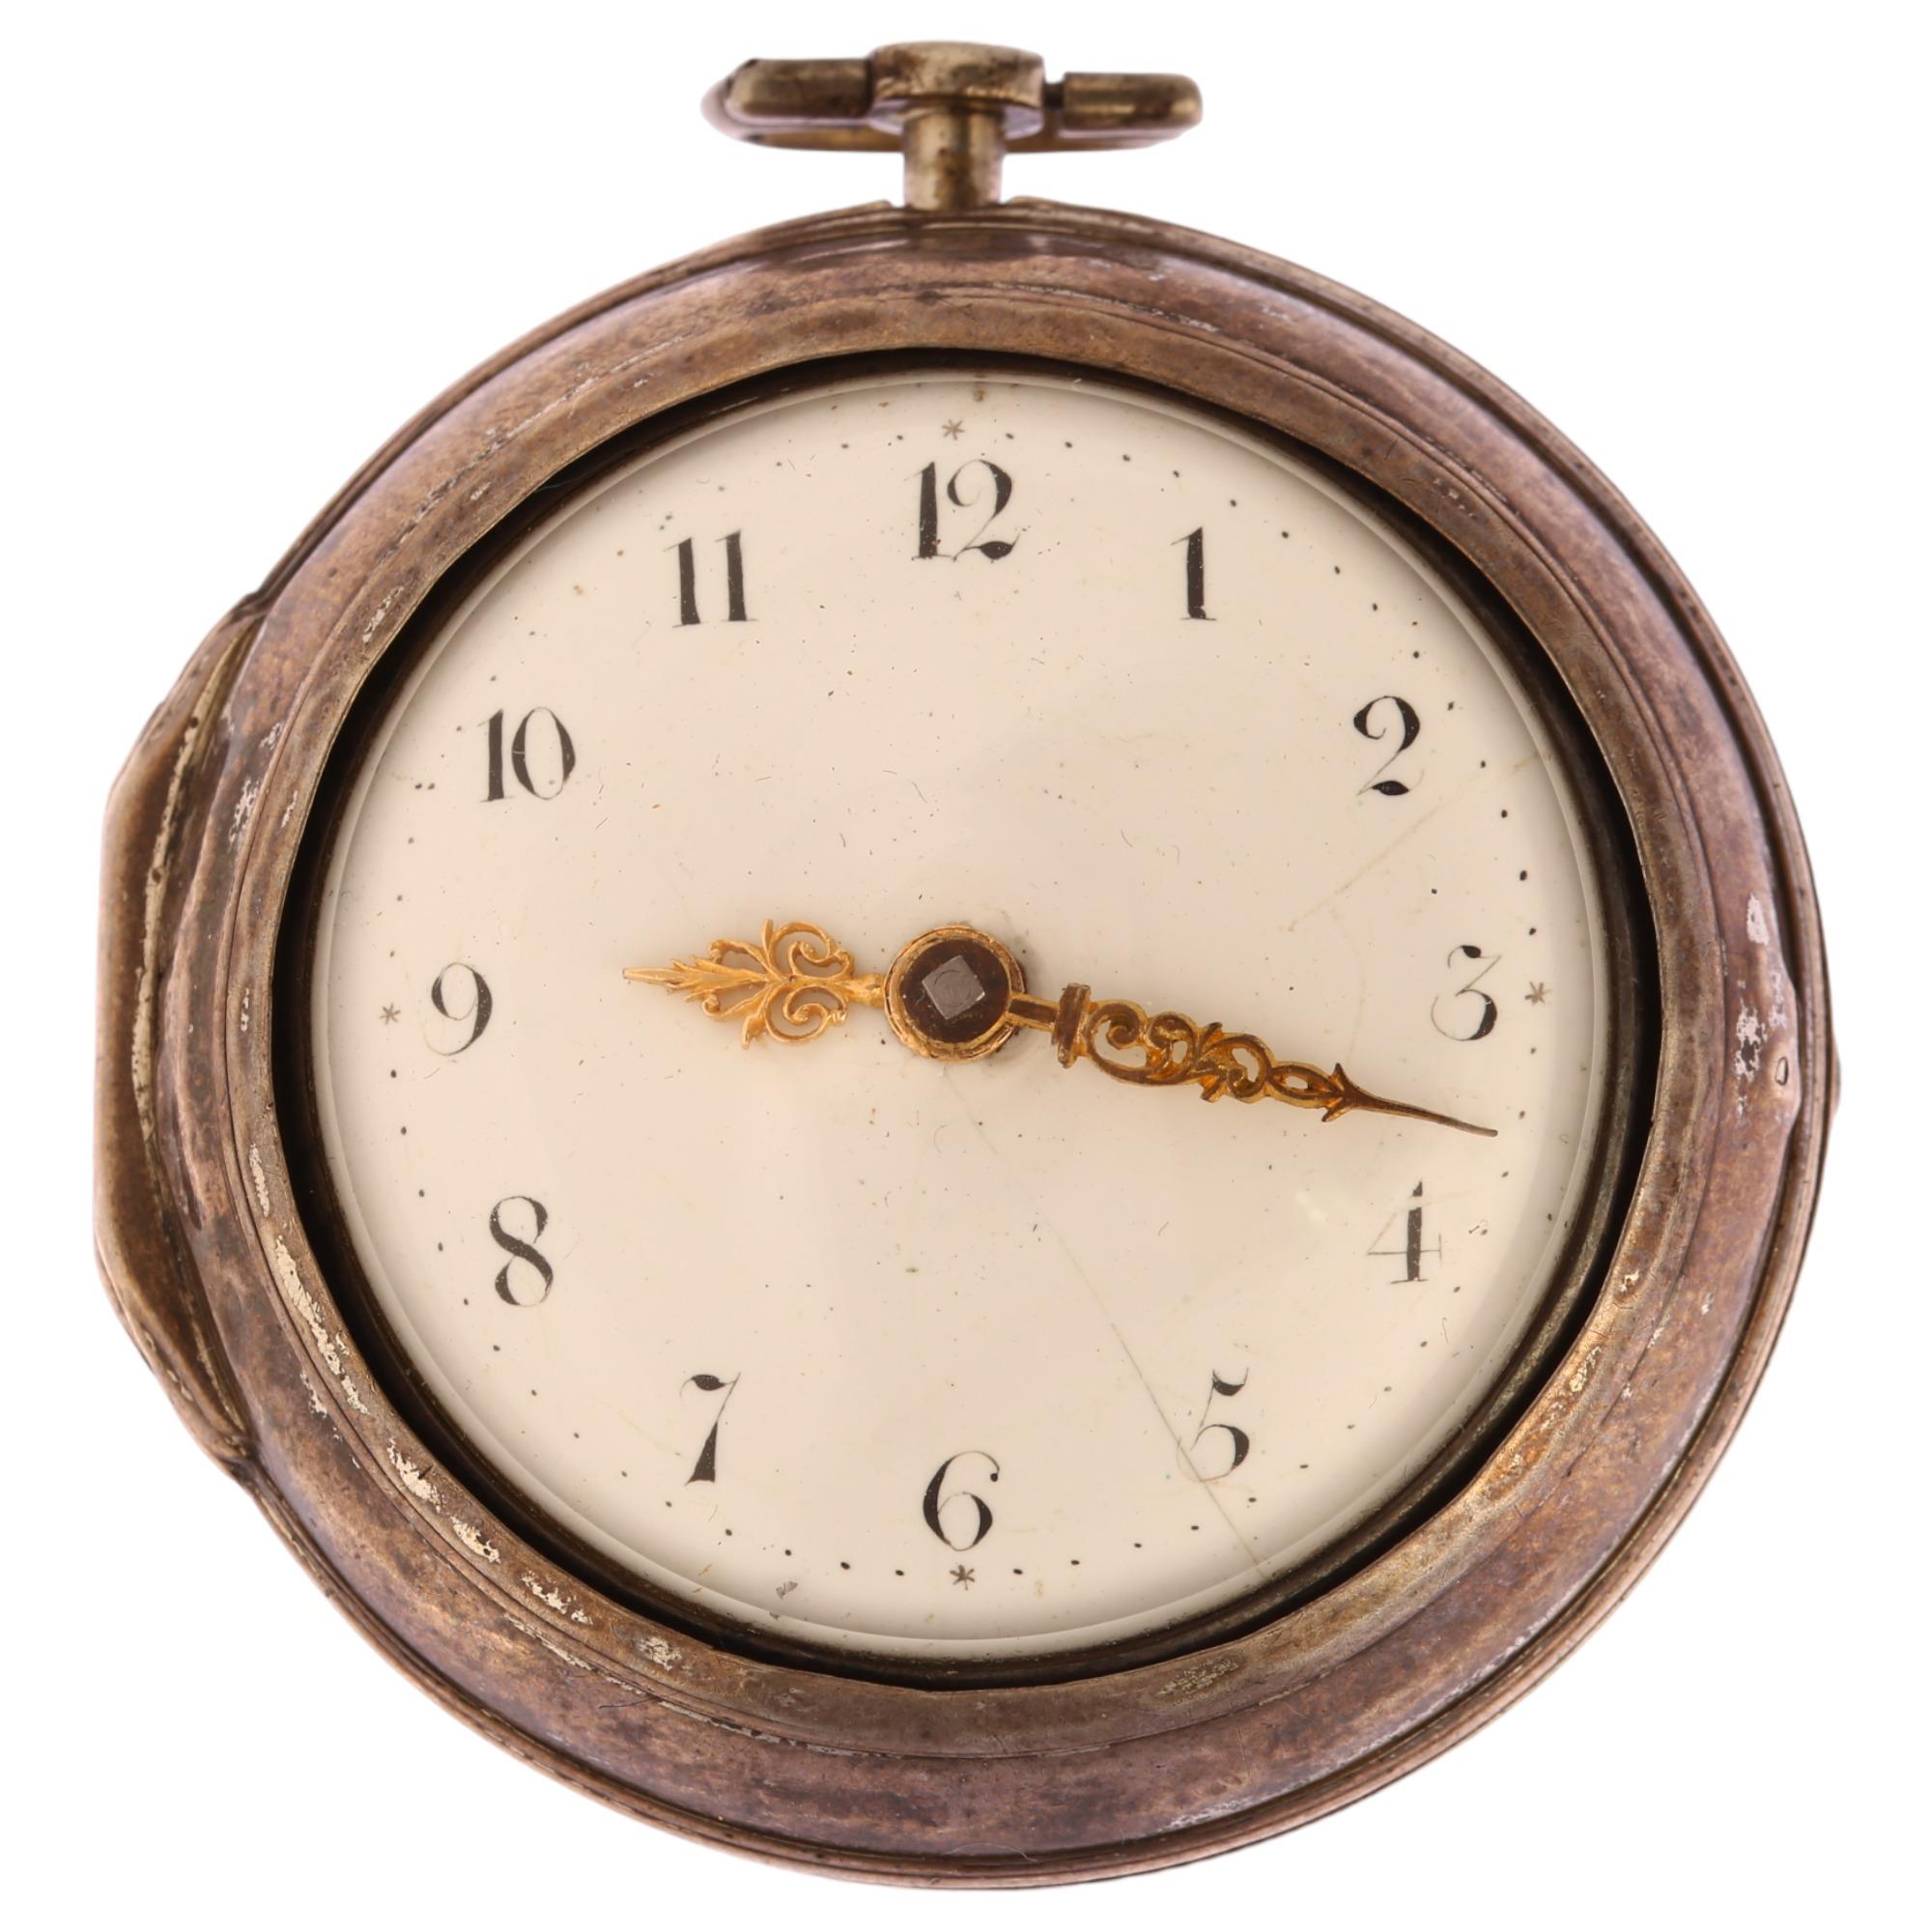 An early 19th century silver pair-cased open-face key-wind Verge pocket watch, Thomas Crook of